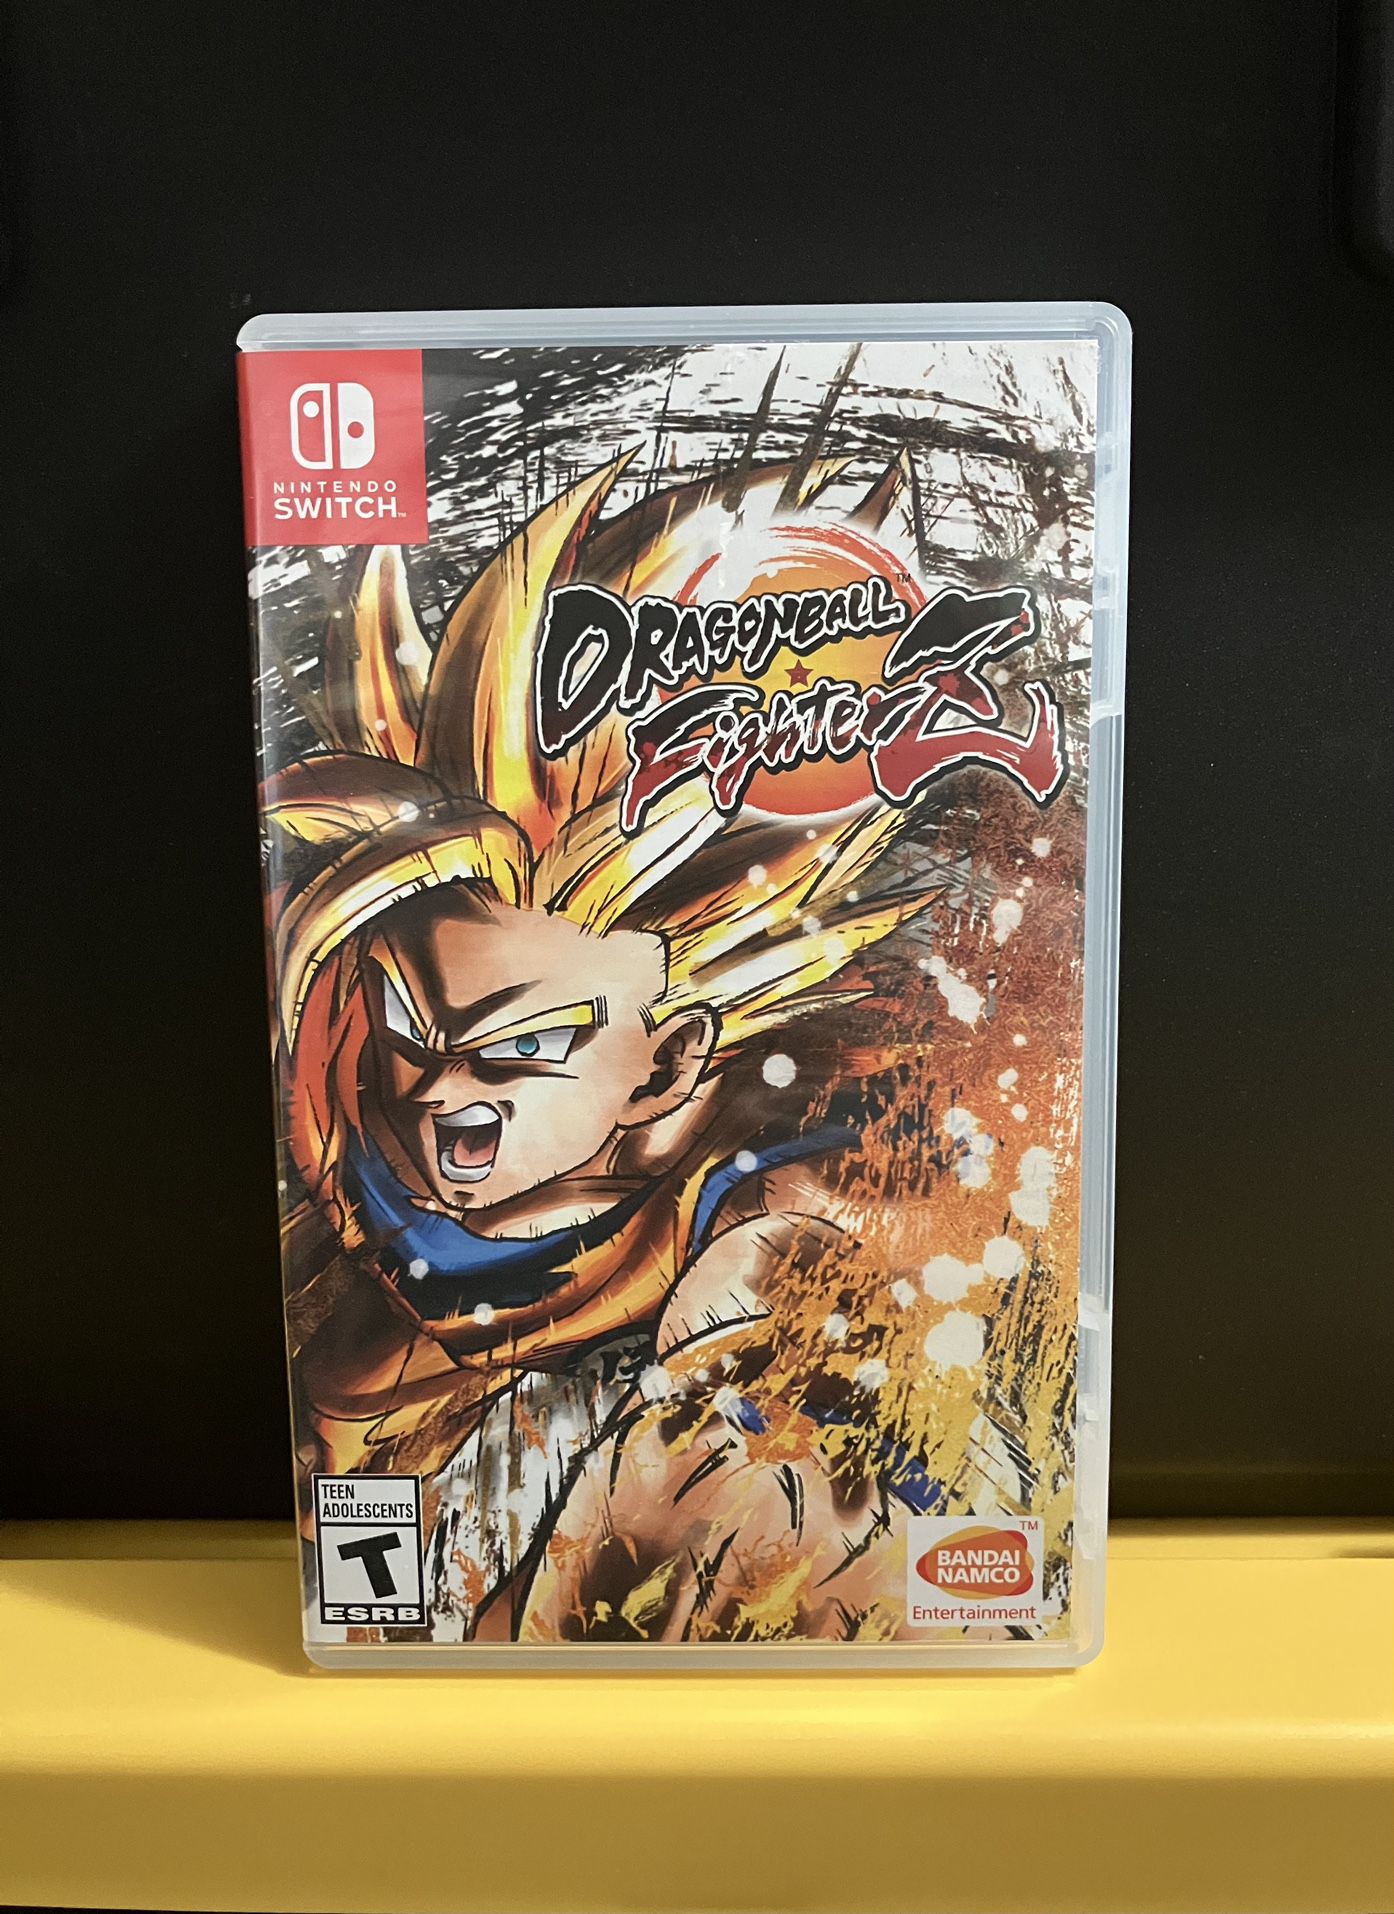 DRAGON BALL FighterZ dragonball Z for Nintendo Switch video game system or Lite OLED fighters fighter